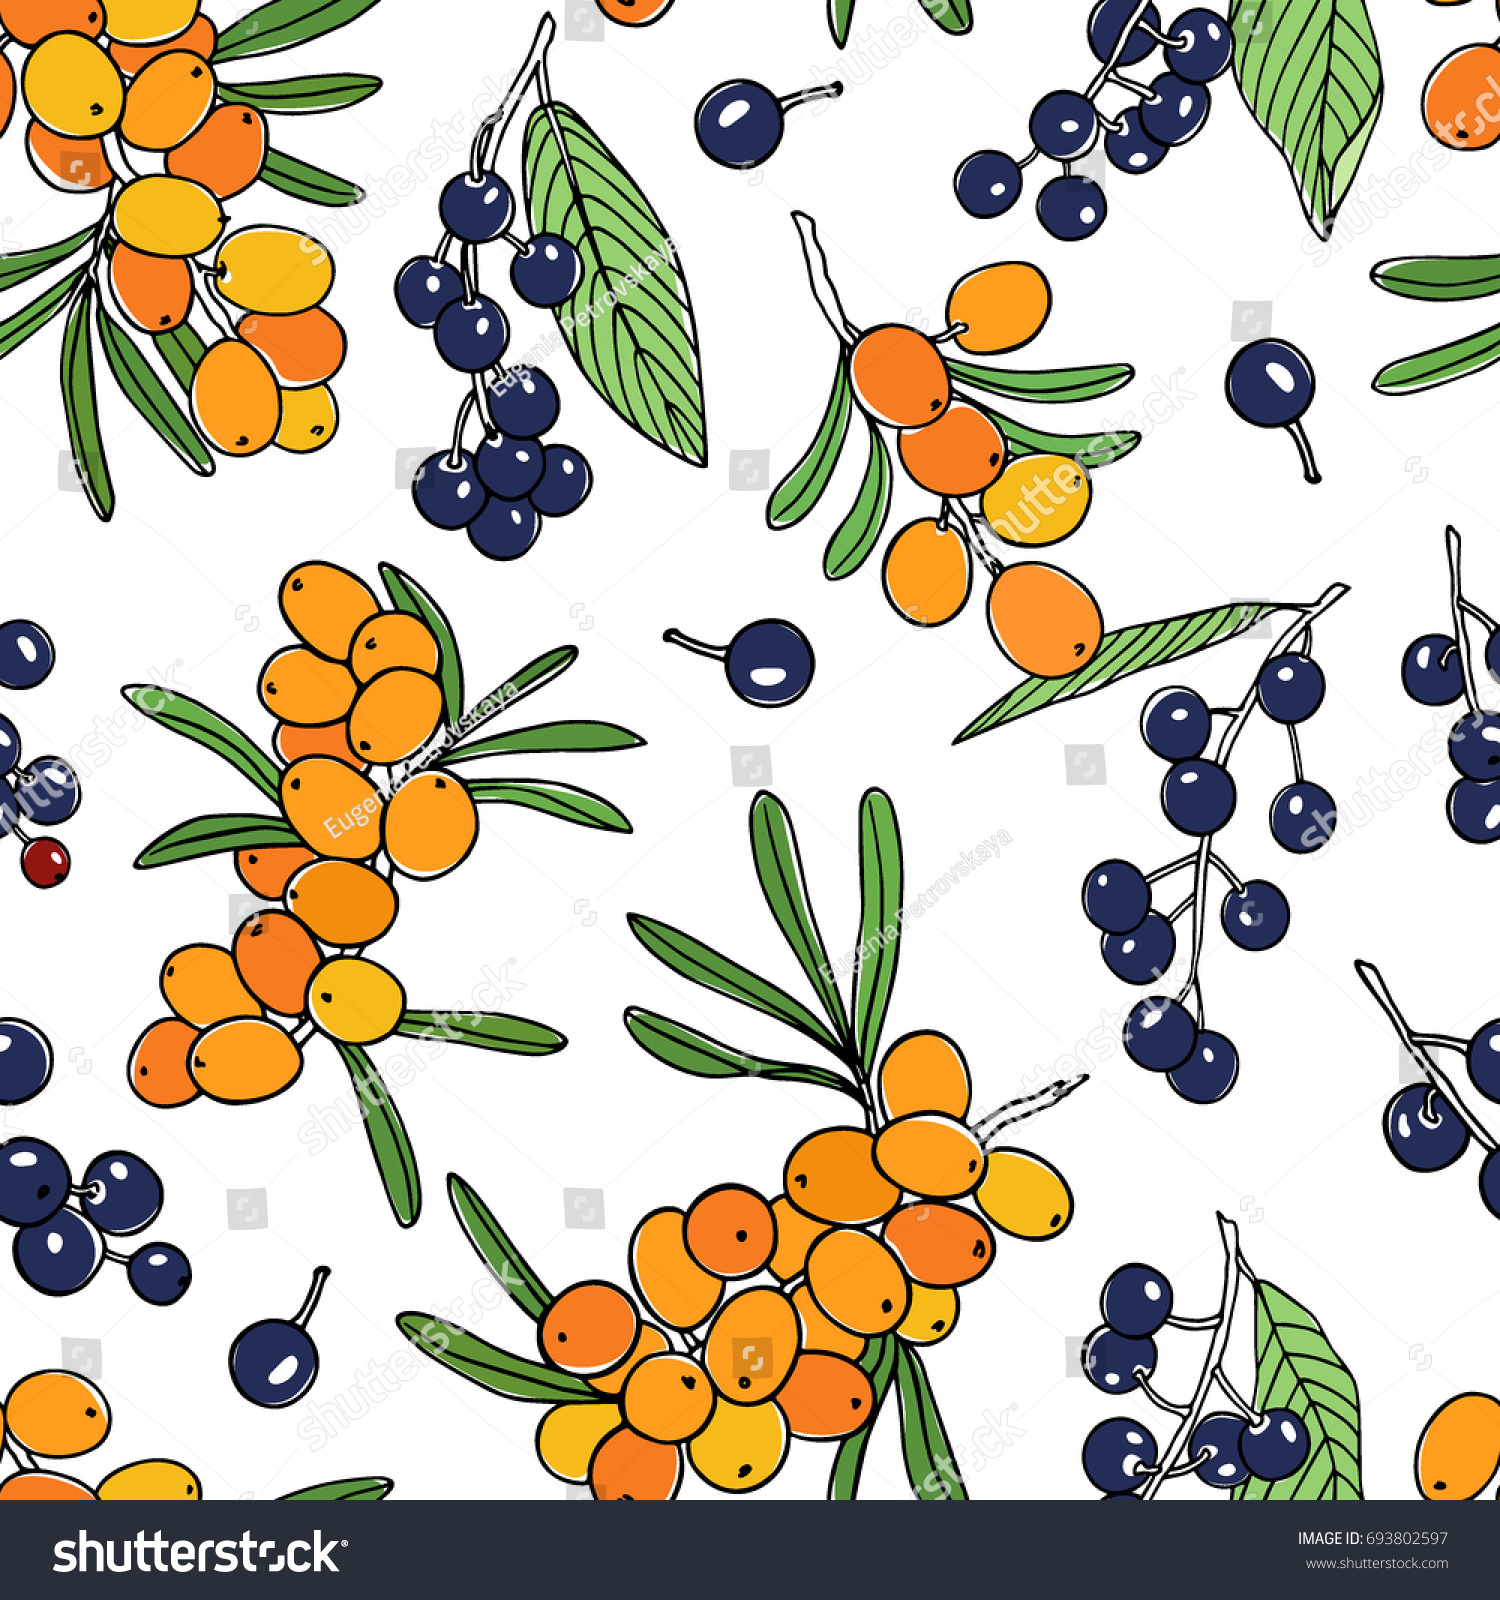 Vector seamless pattern with hand drawn sea buckthorn and bird cherry twigs. Beautiful food design elements, ink drawing #693802597